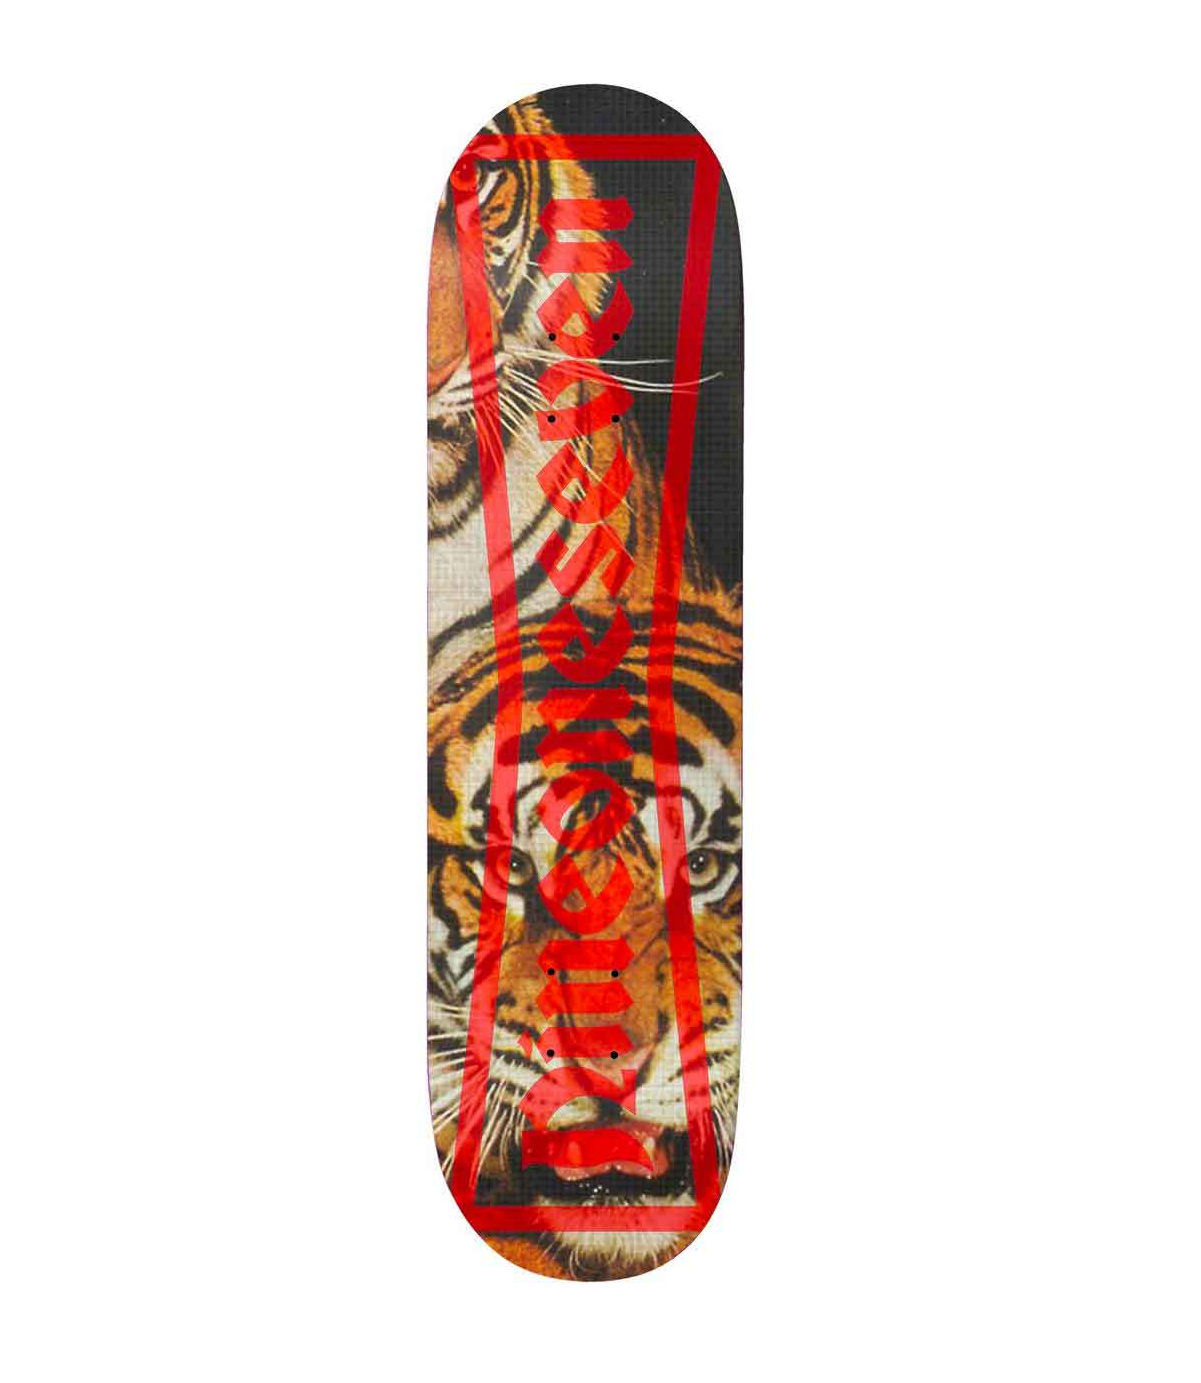 Call Me 917 Tiger Style Deck (8.0)